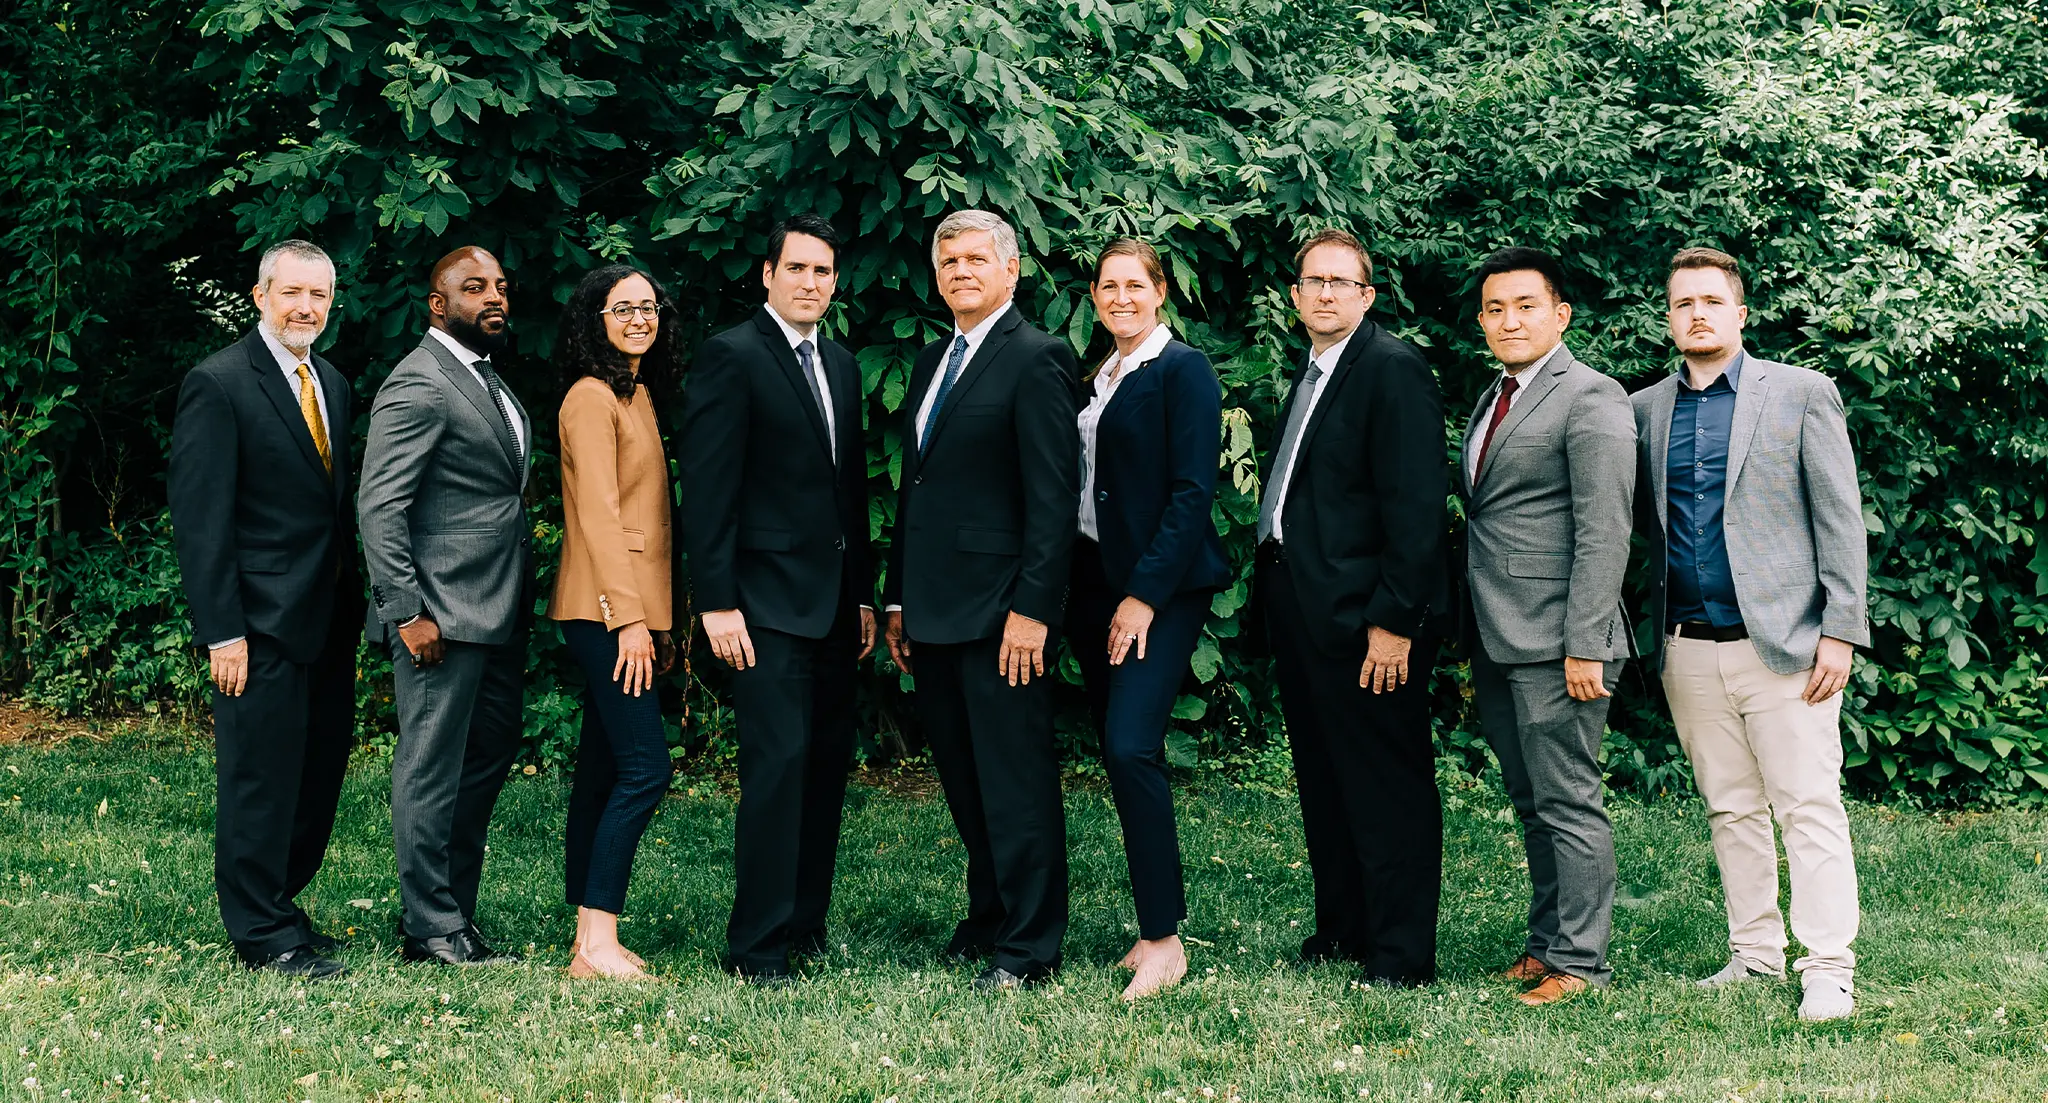 A group photo of the 9 attorneys of Cornerstone Law Firm. From left to right, the order is: Attorney Otto, Attorney Browne, Attorney Caloia, Attorney Ready, Attorney Distasio, Attorney Rauch-Mannino, Attorney Winter, Attorney Hong, and Attorney Mayle.